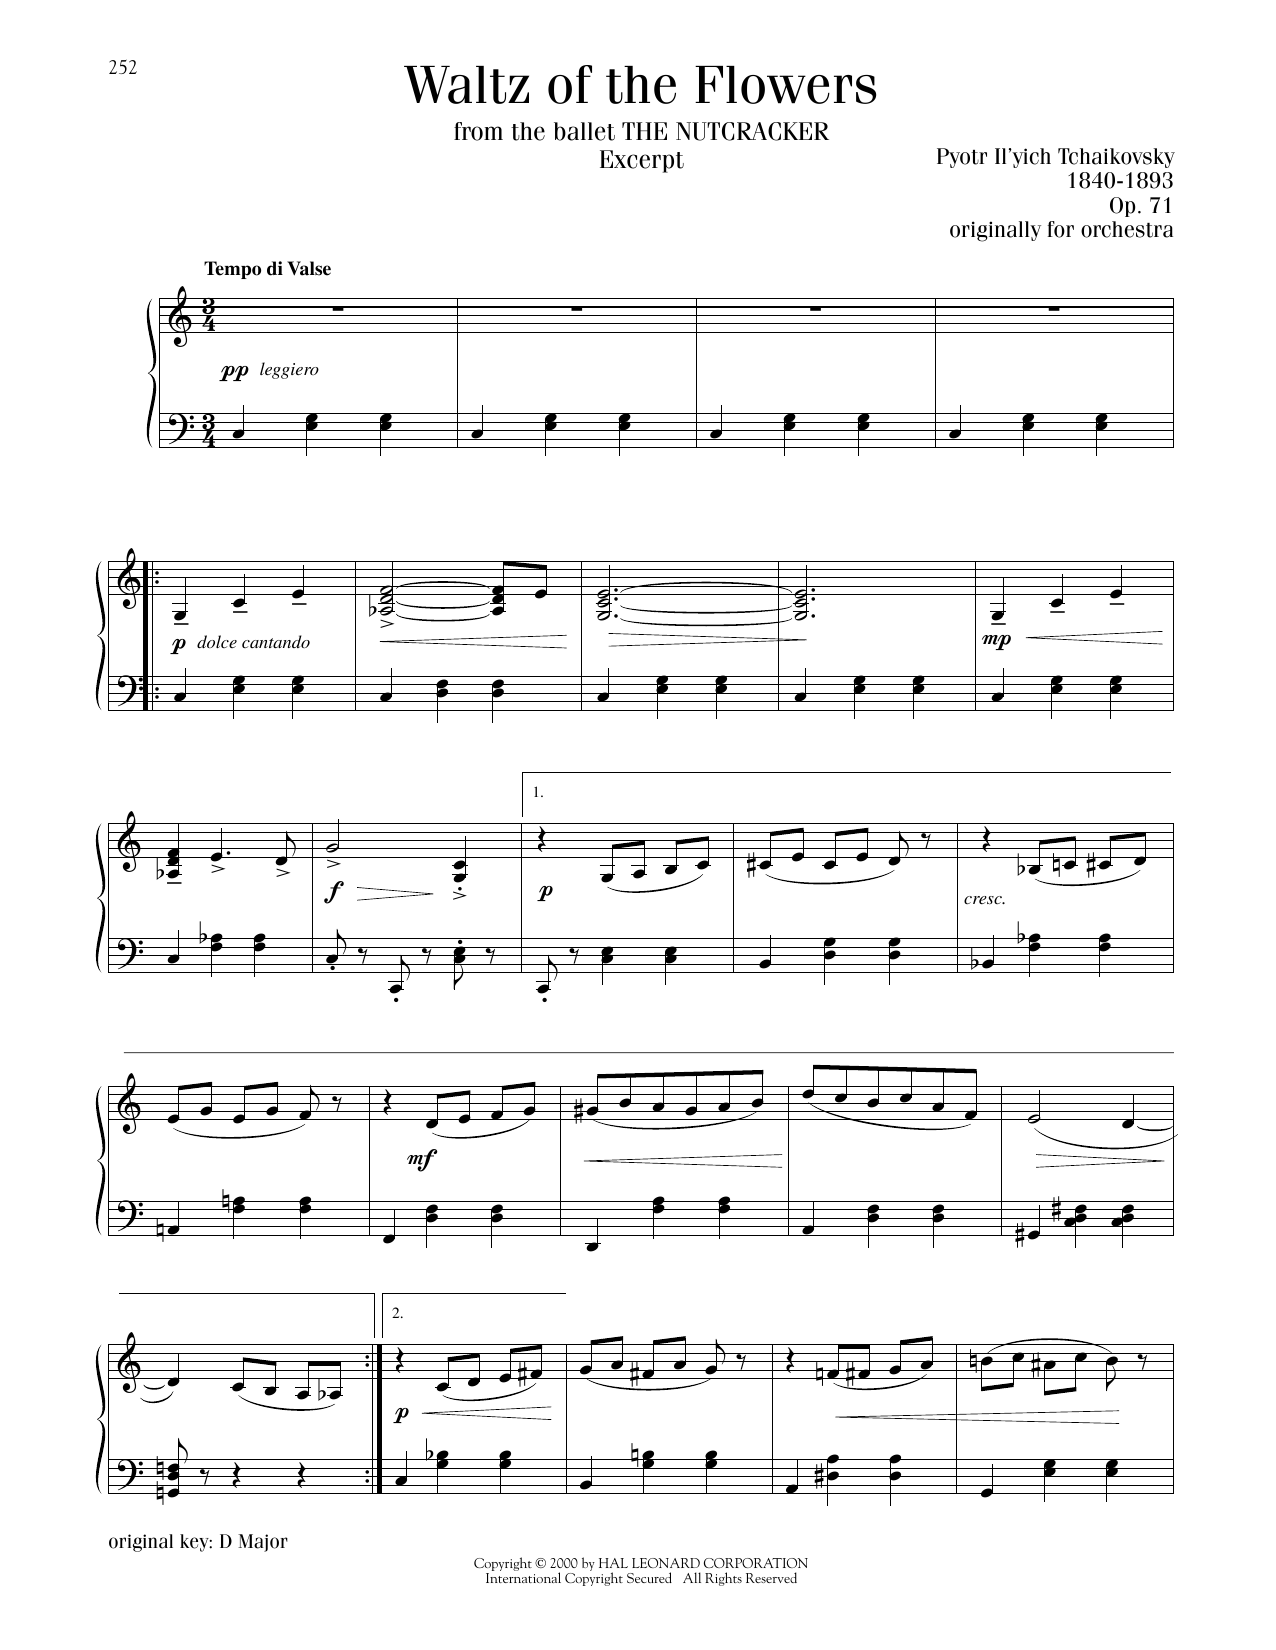 Pyotr Il'yich Tchaikovsky Waltz Of The Flowers, Op. 71a sheet music notes printable PDF score